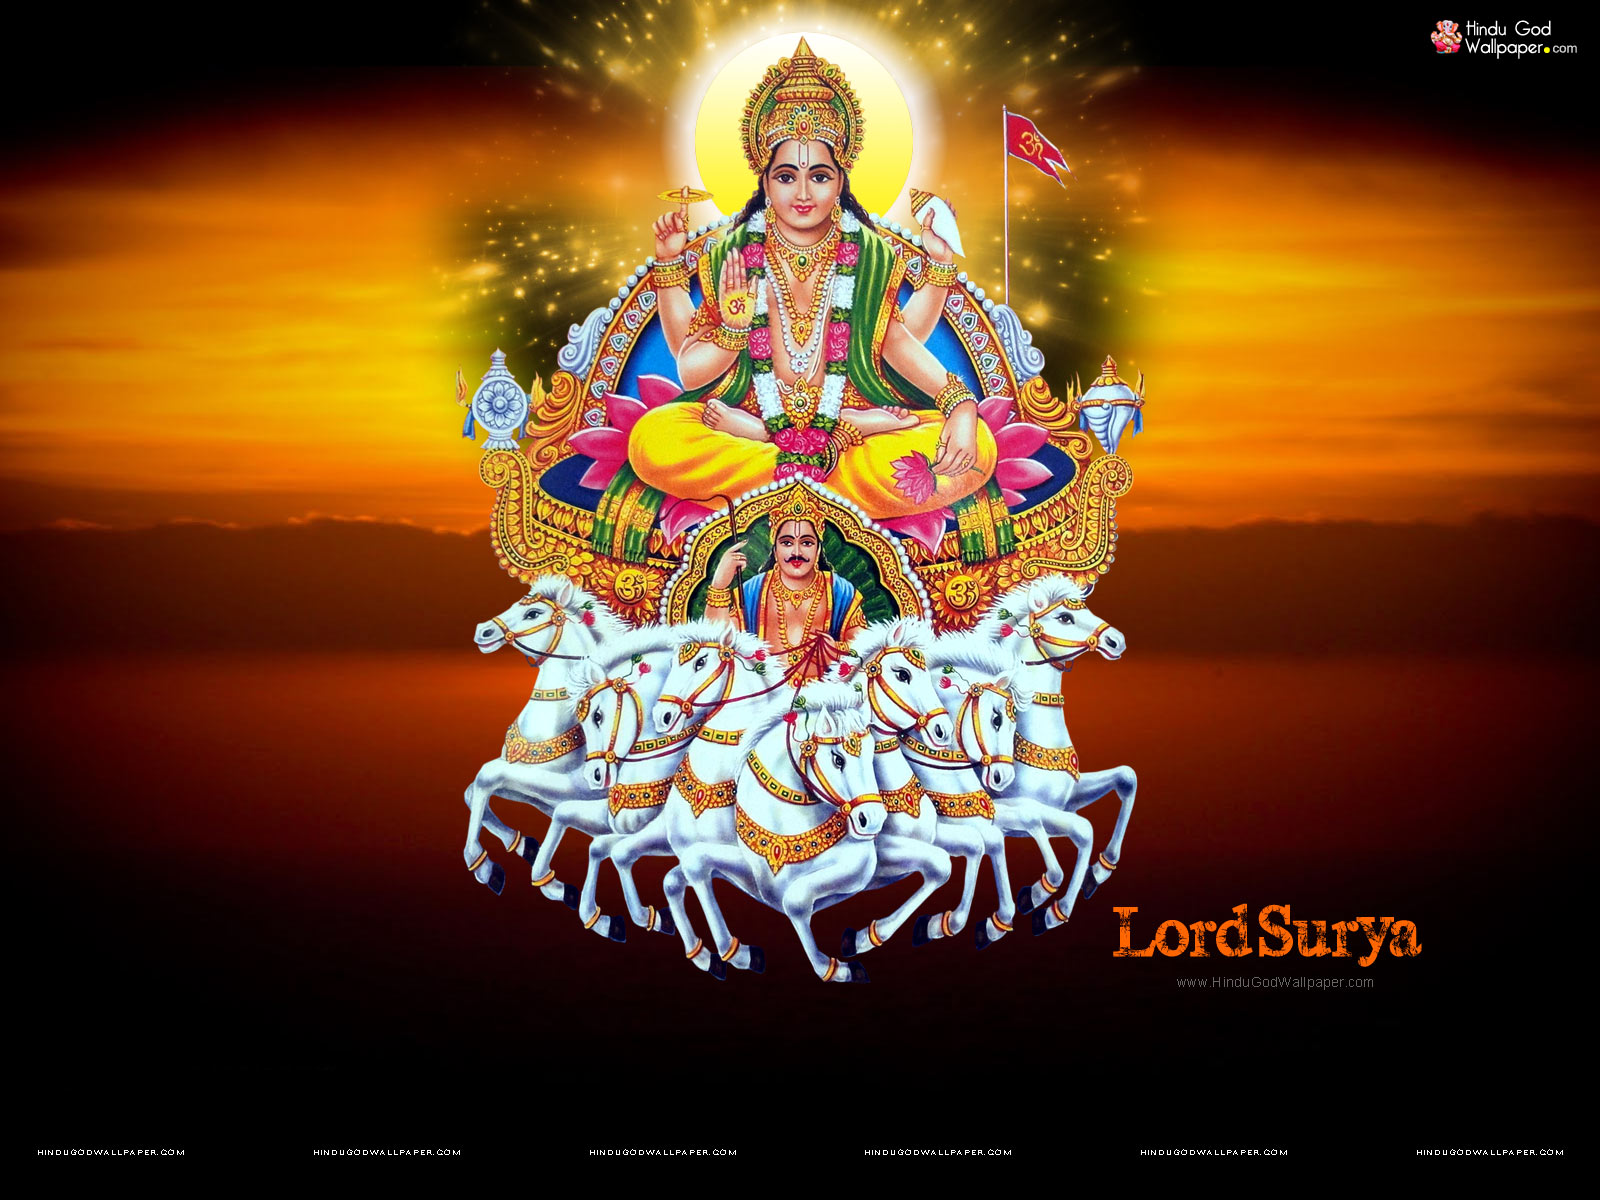 Lord Surya Dev Wallpapers, pictures & images Download